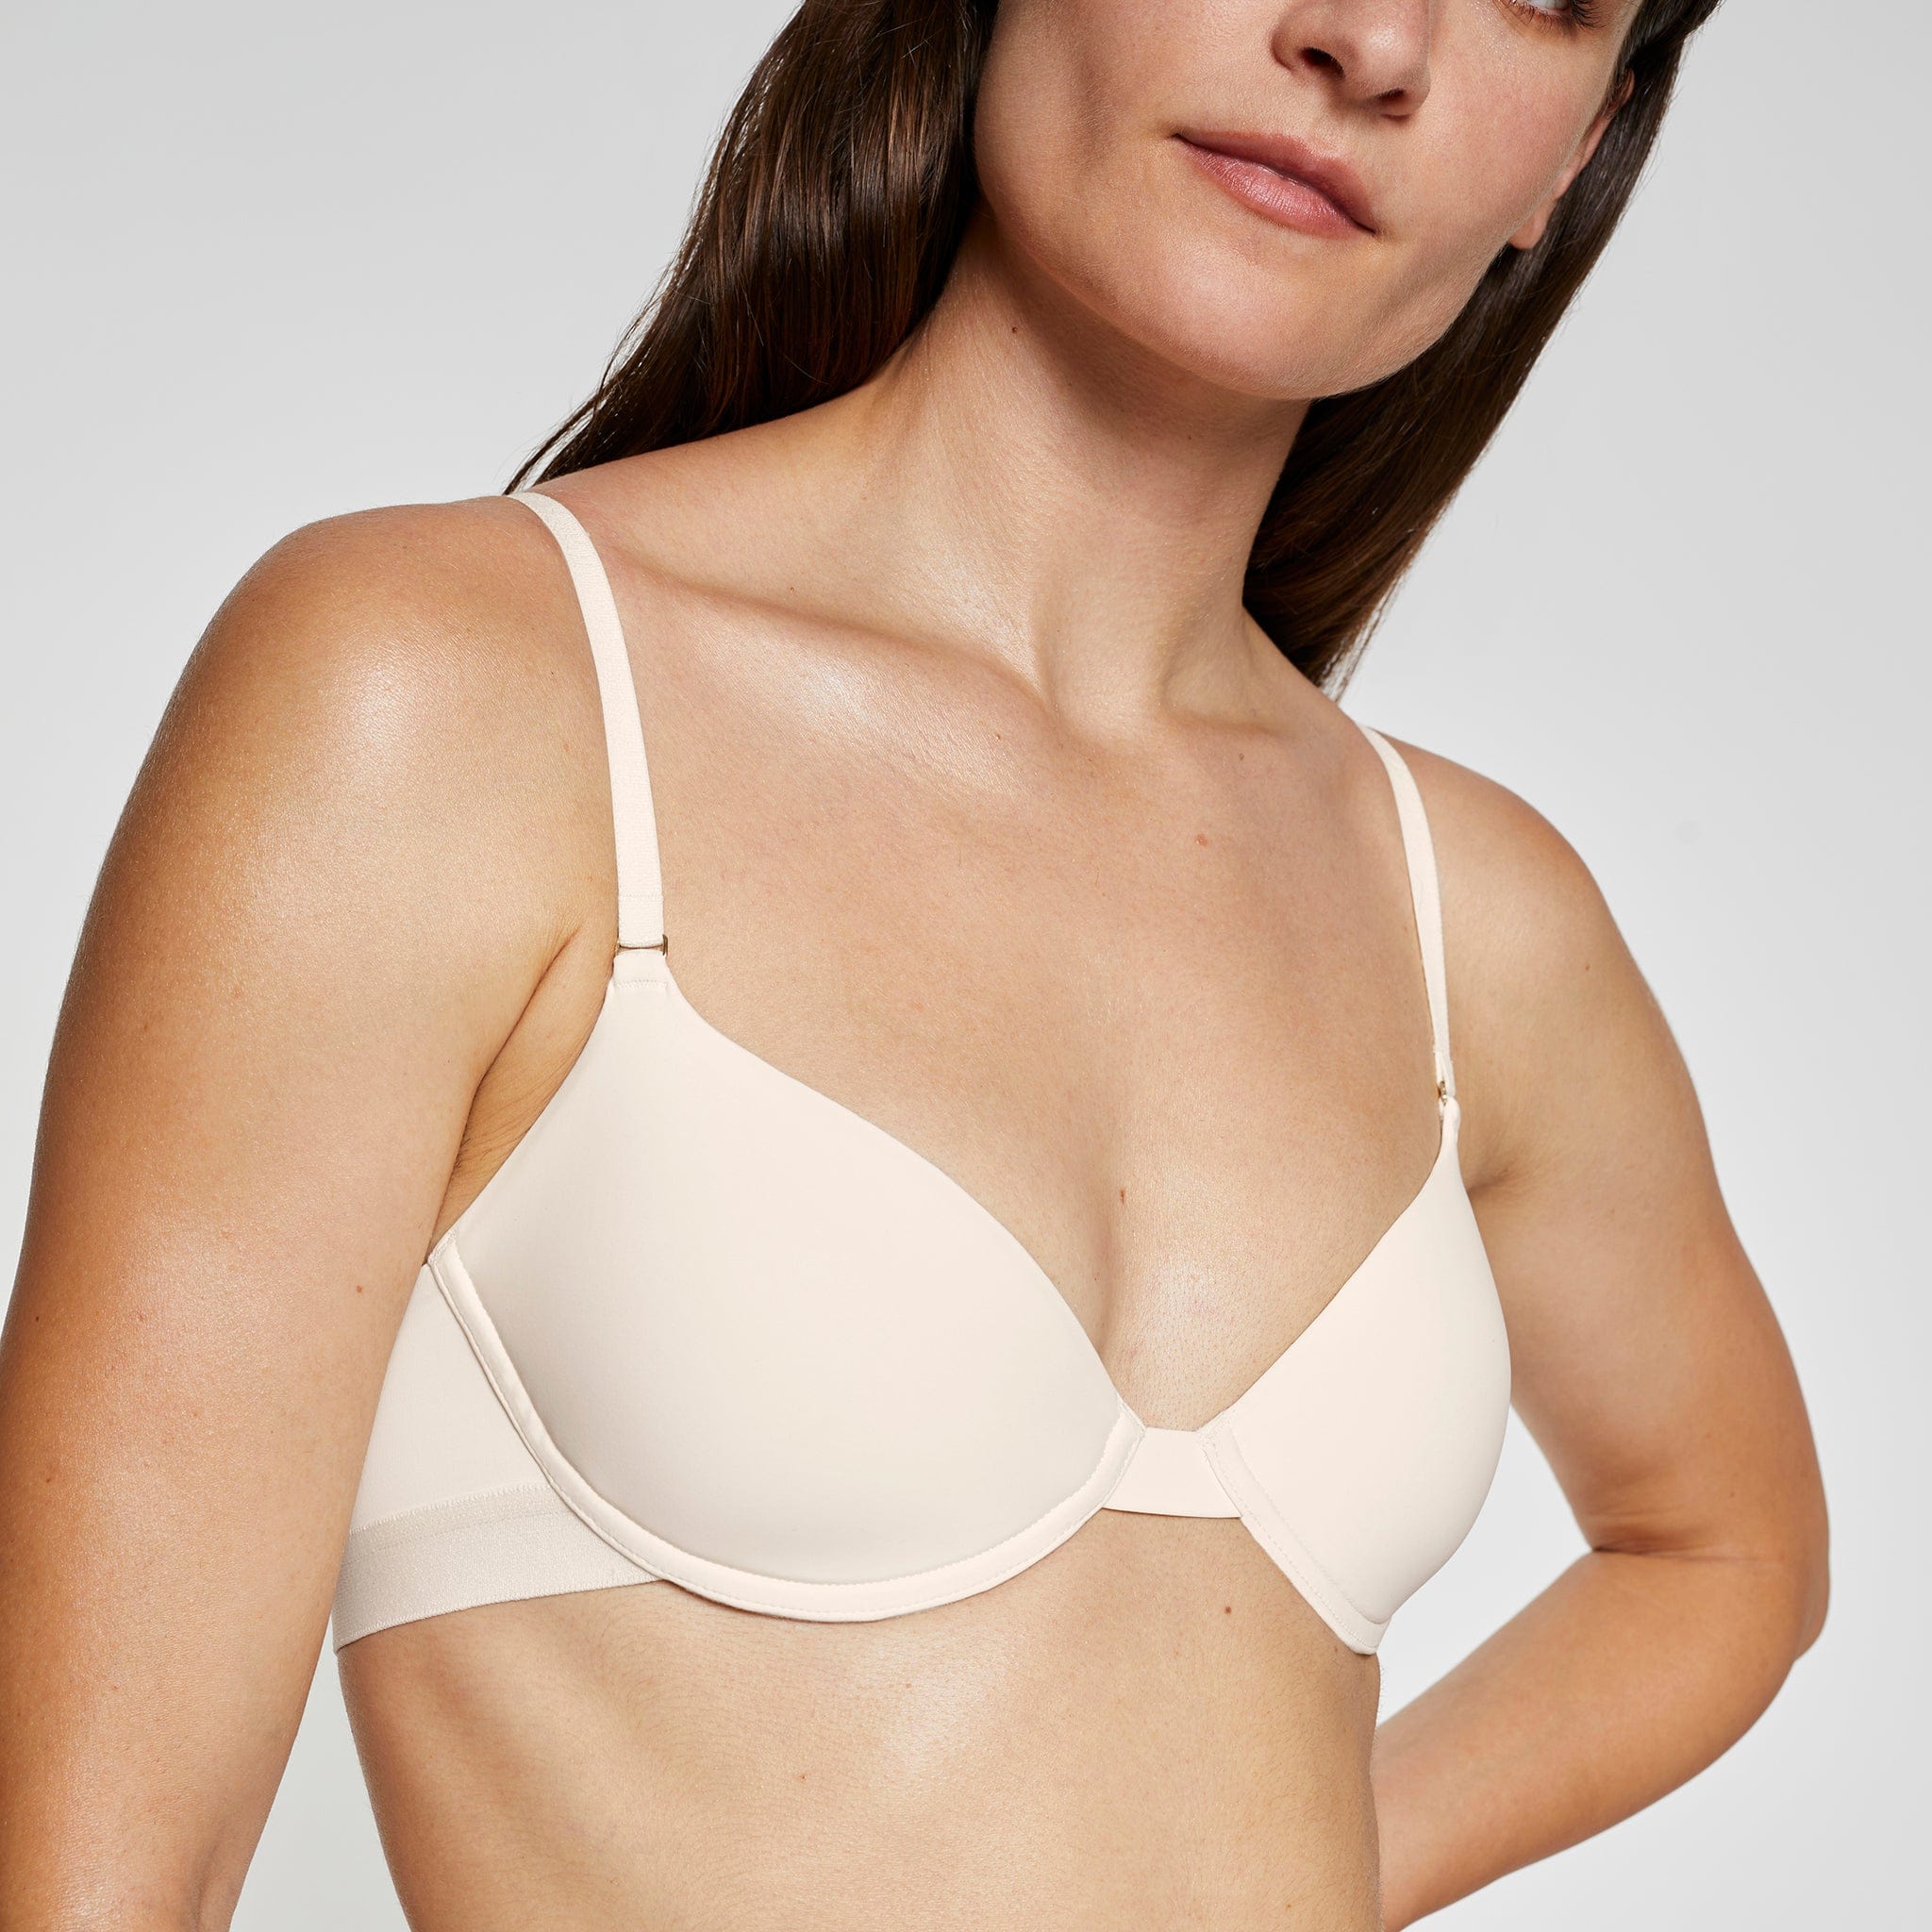 Buy Casual Chic Padded Non-Wired T-shirt Bra, White Smoke Color Bra